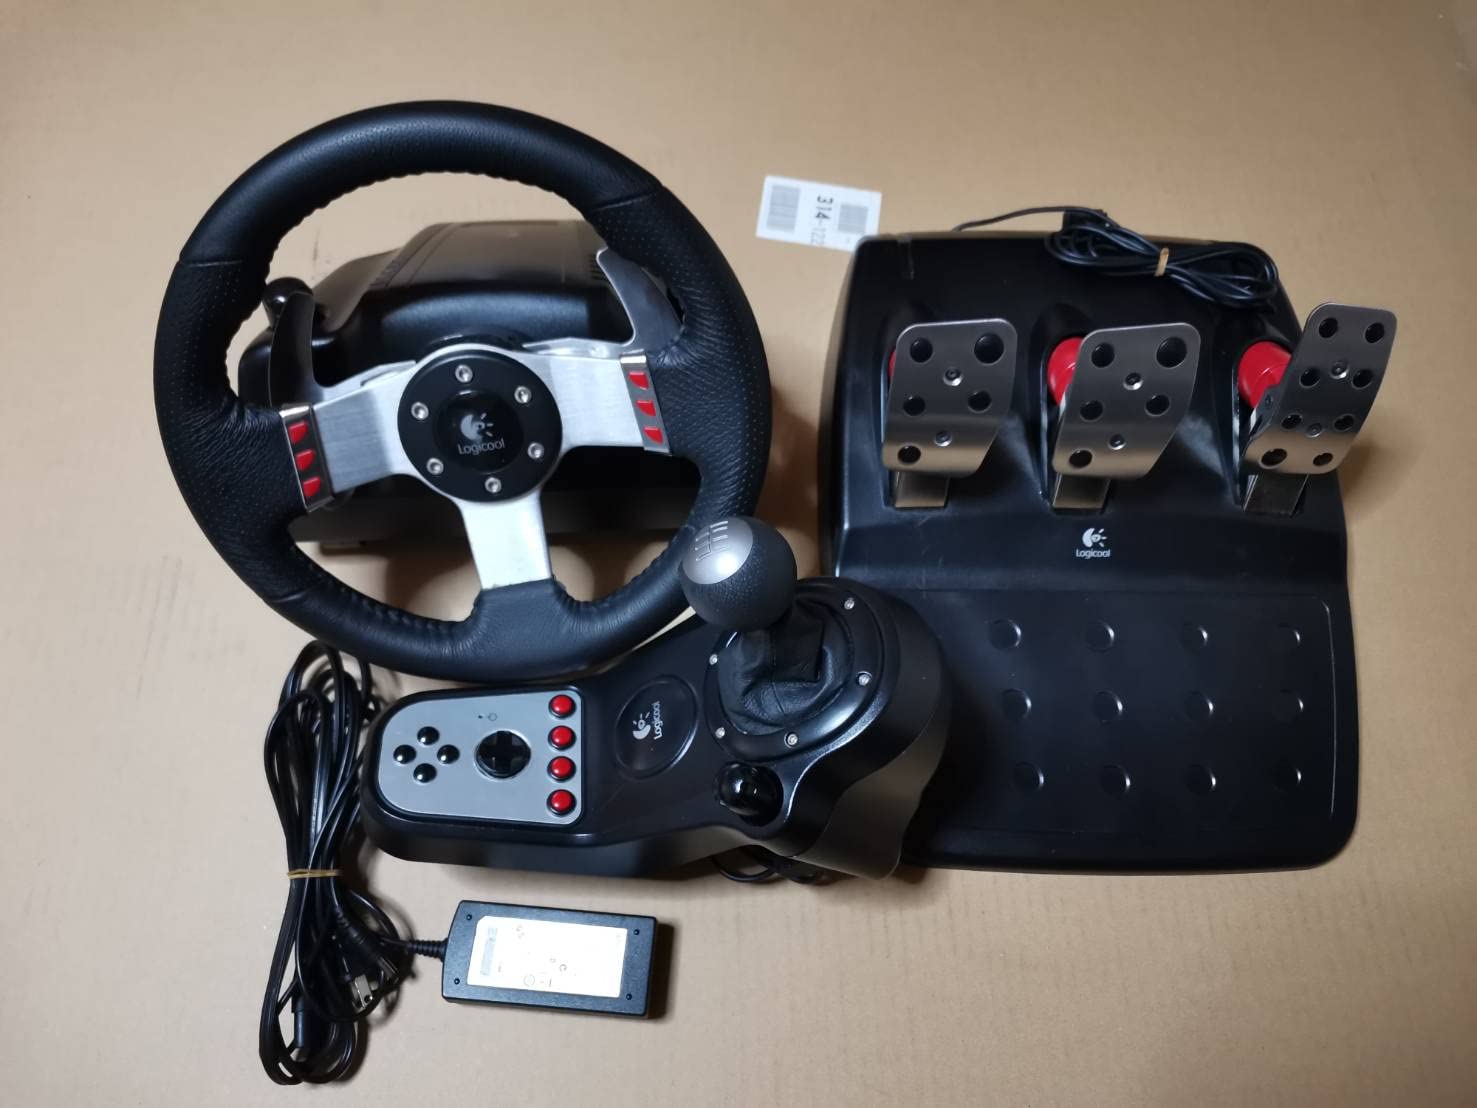 What Games Are Compatible With The Logitech G27 Racing Wheel